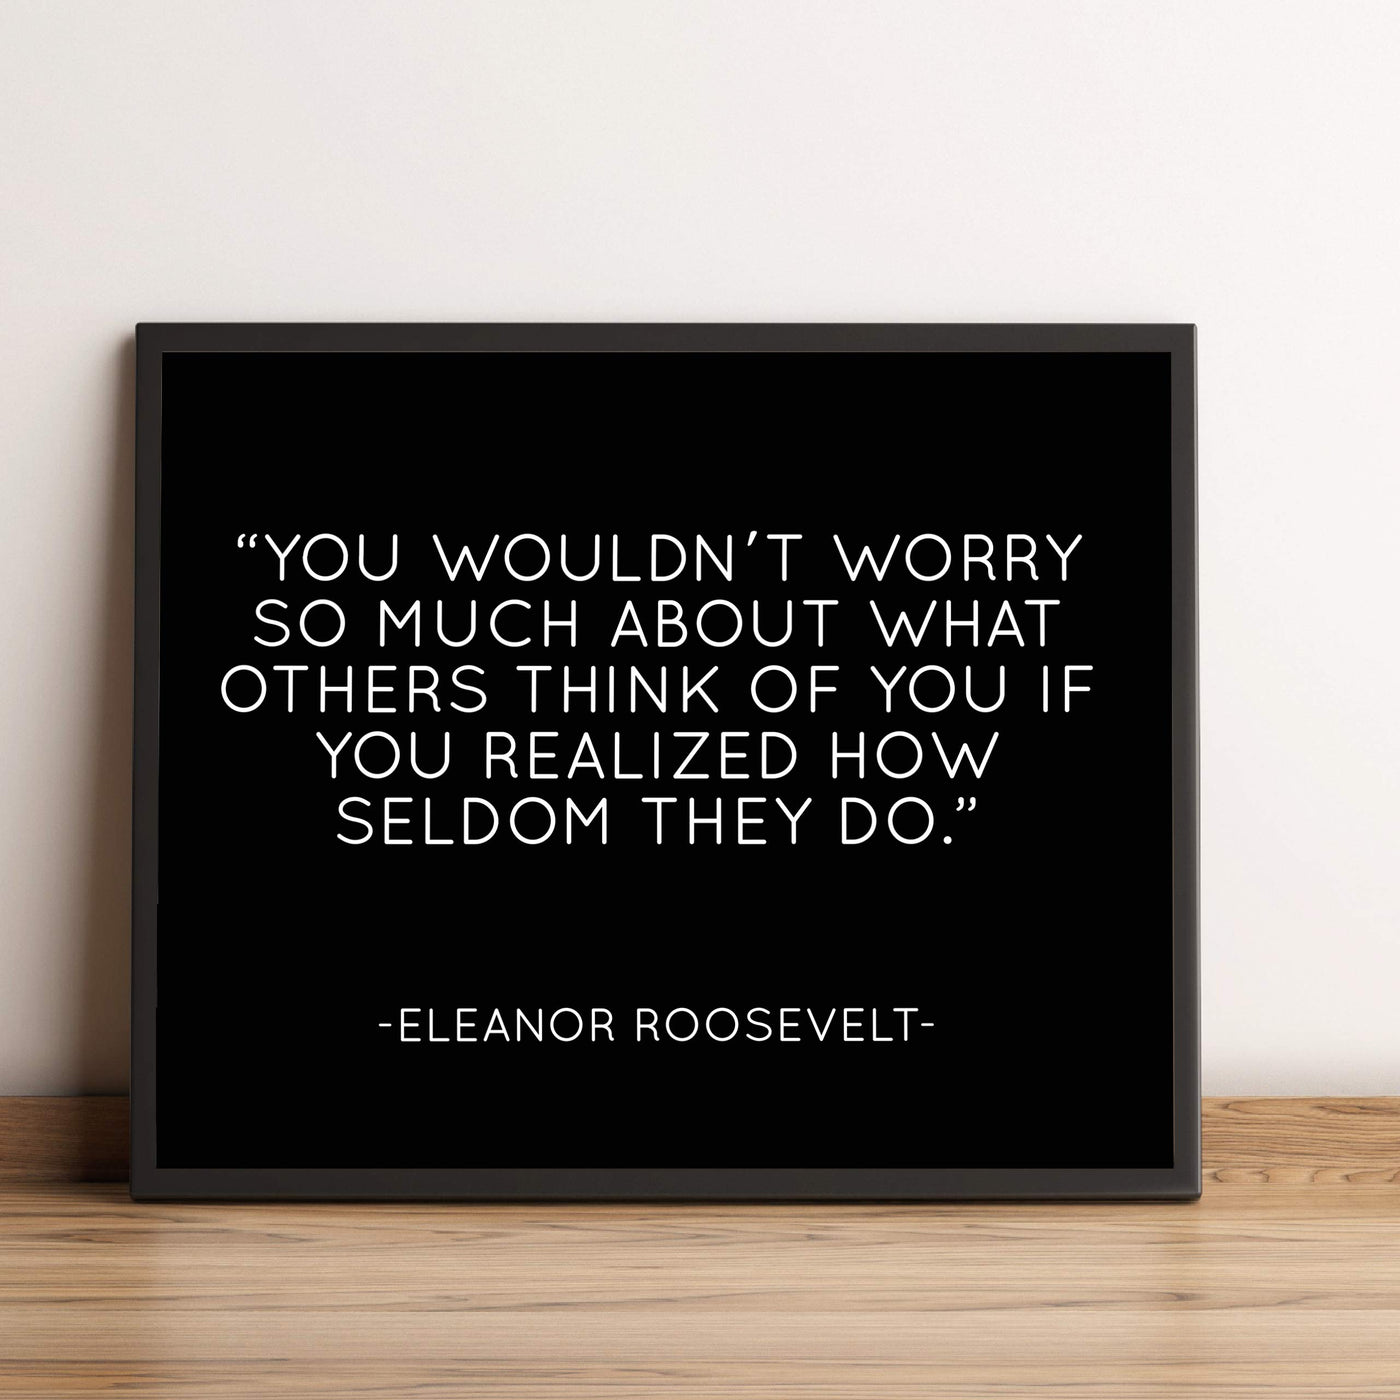 Eleanor Roosevelt Quotes Wall Art-"You Wouldn't Worry About What Others Think"-10 x 8" Modern Typographic Wall Print-Ready to Frame. Inspirational Home-Office-School-Library Decor. Great Advice!